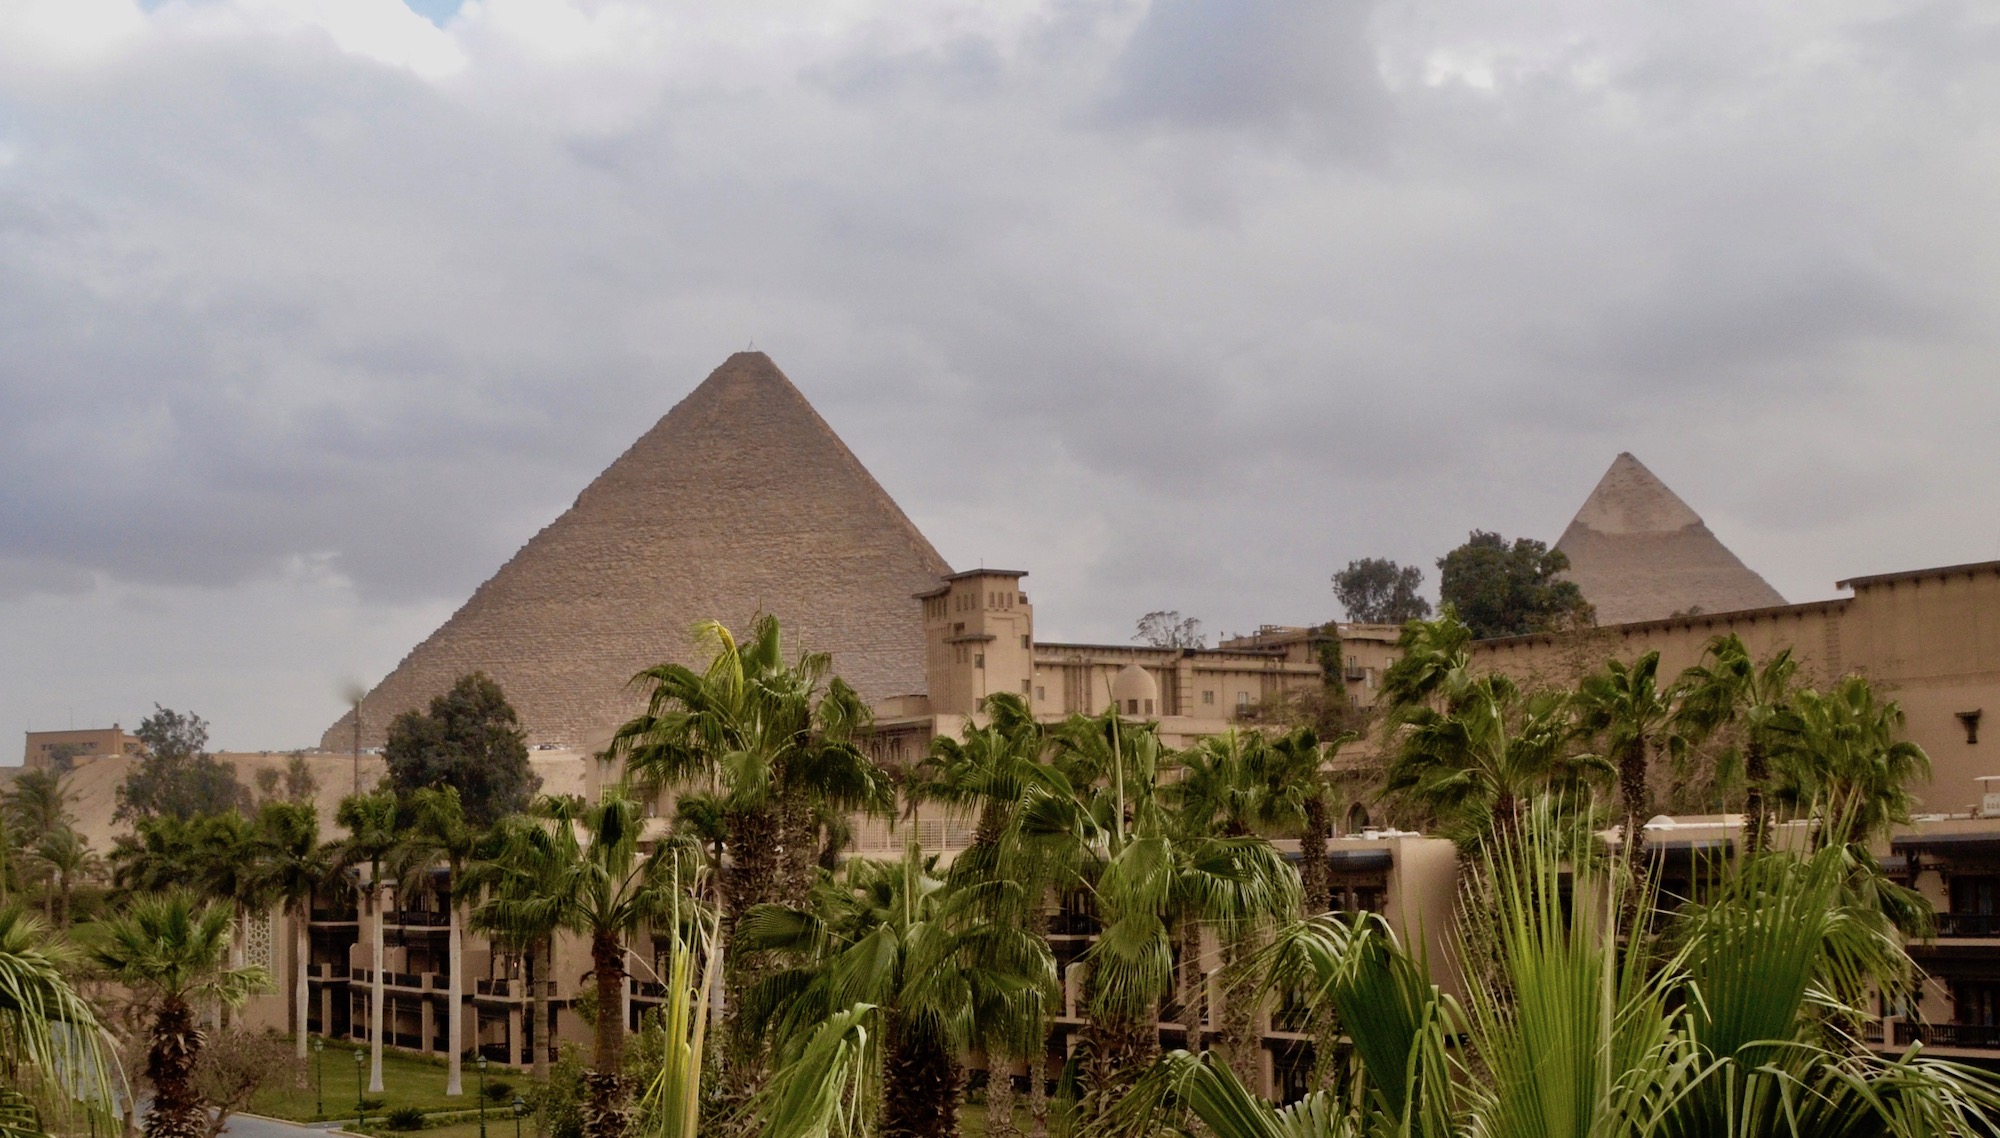 View of the Pyramids from Mena House